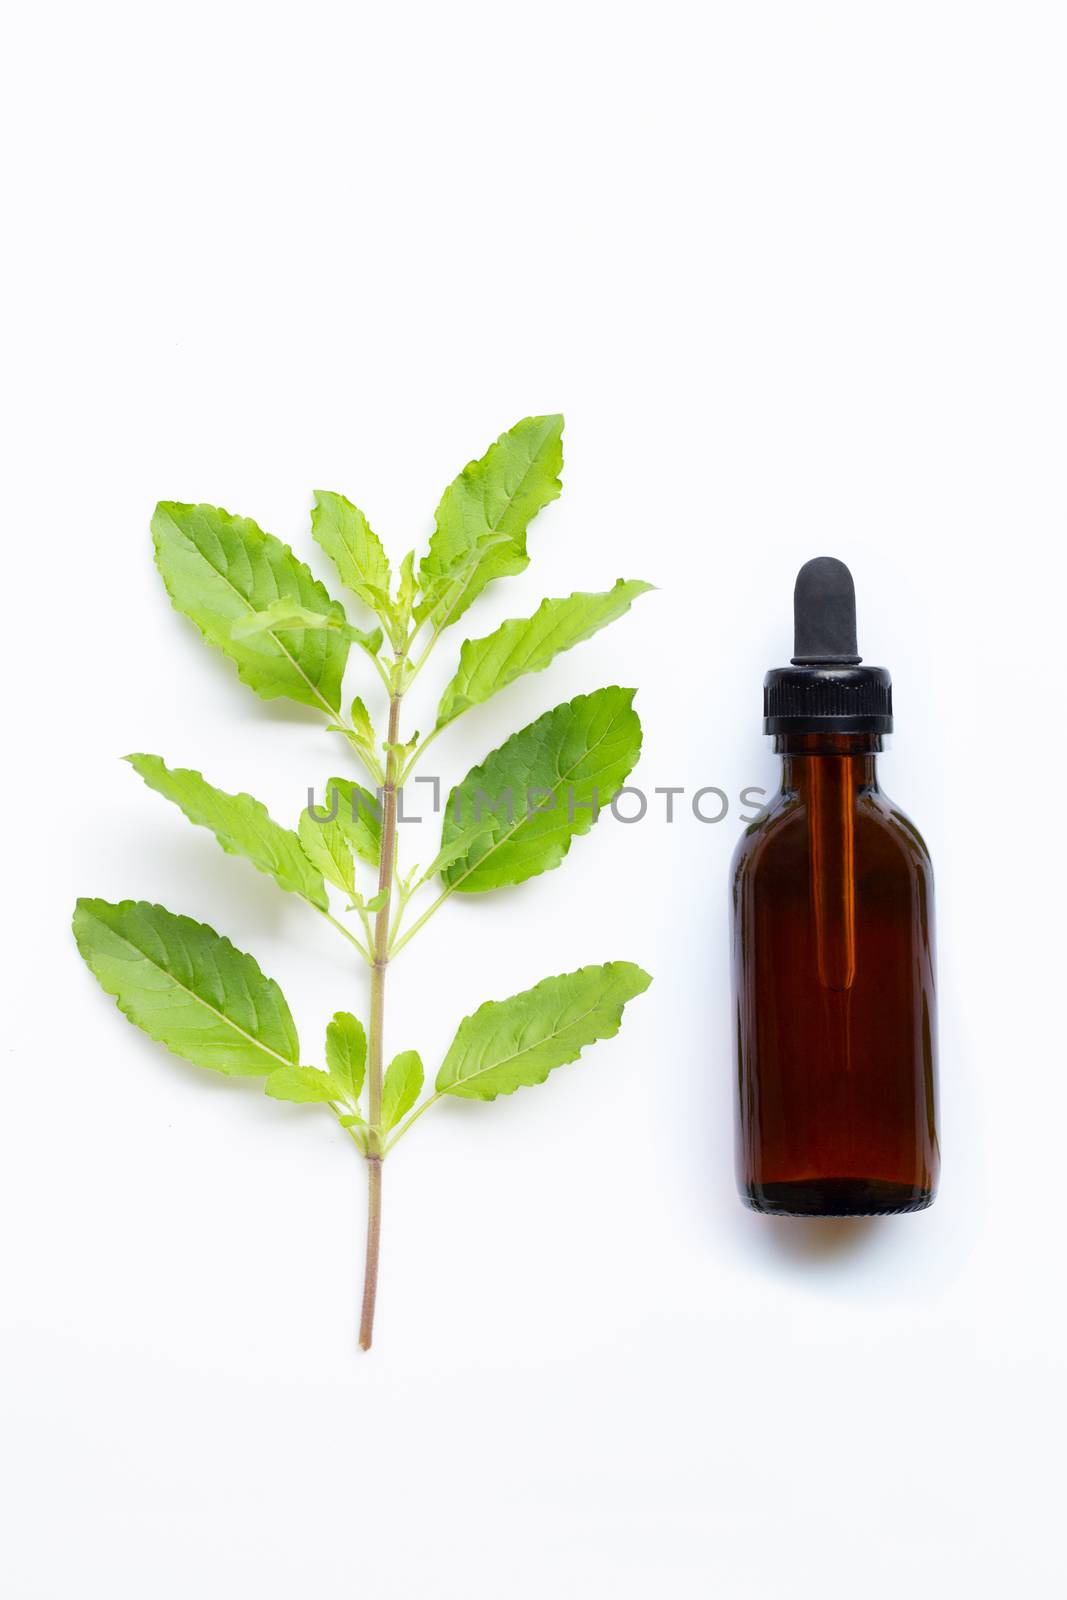 Holy basil essential oil with holy basil  leaves  on white. by Bowonpat